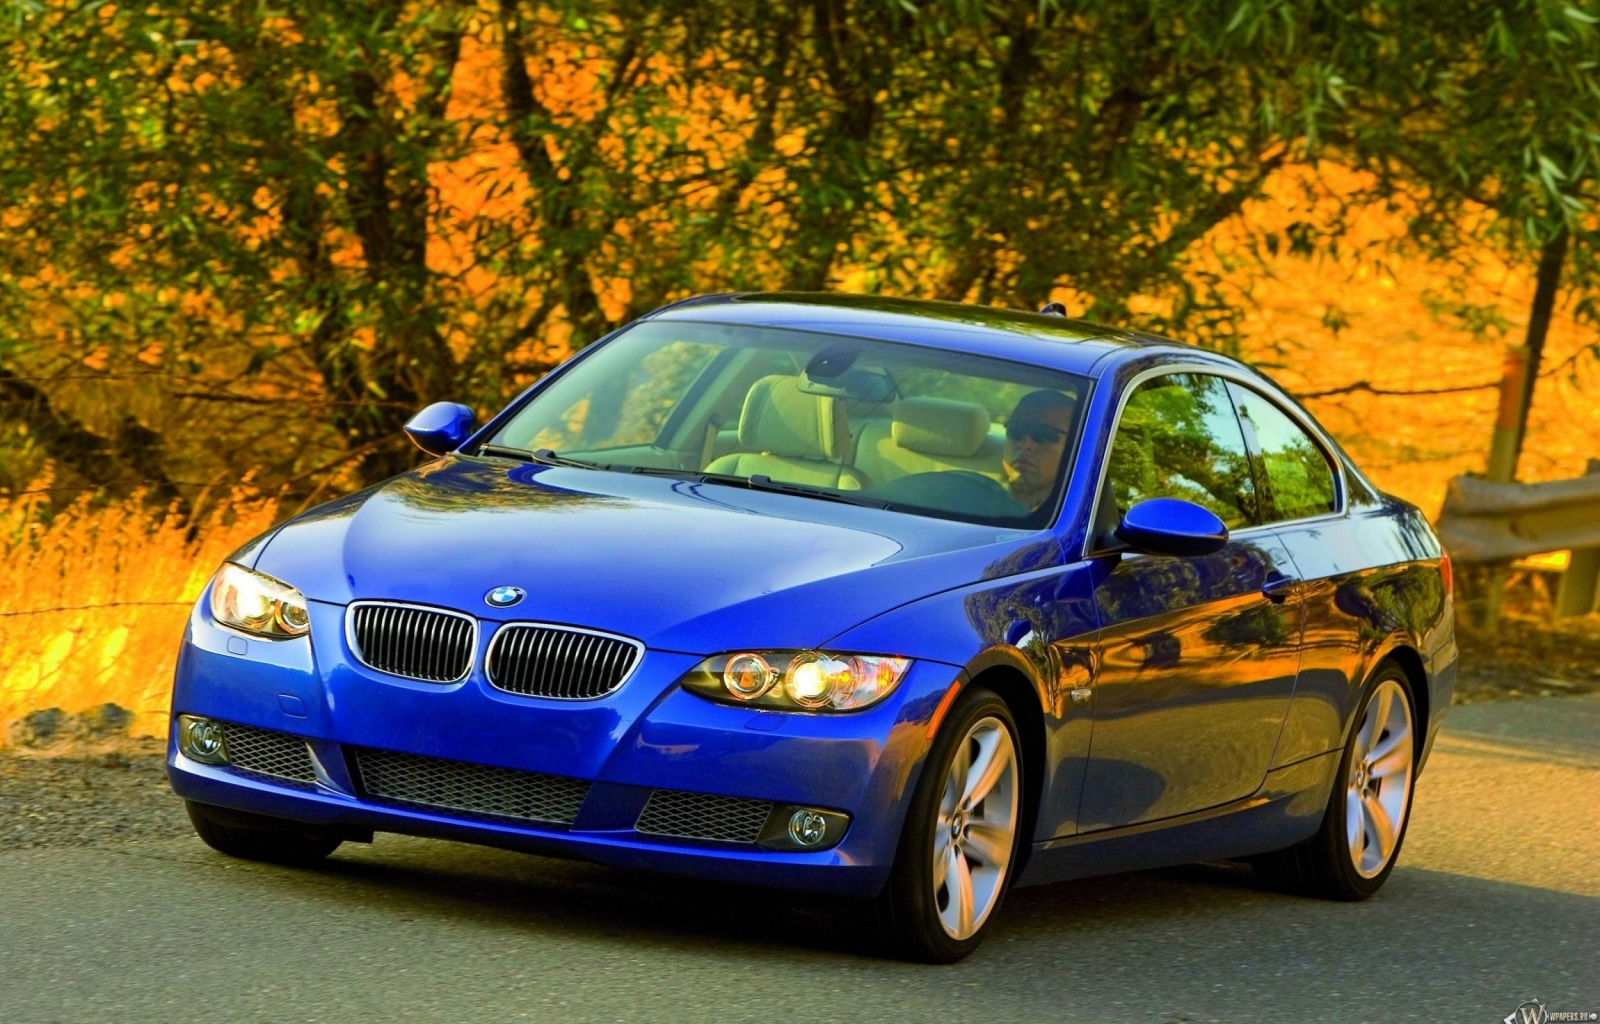 BMW - 3 Series Coupe (2007) 1600x1024